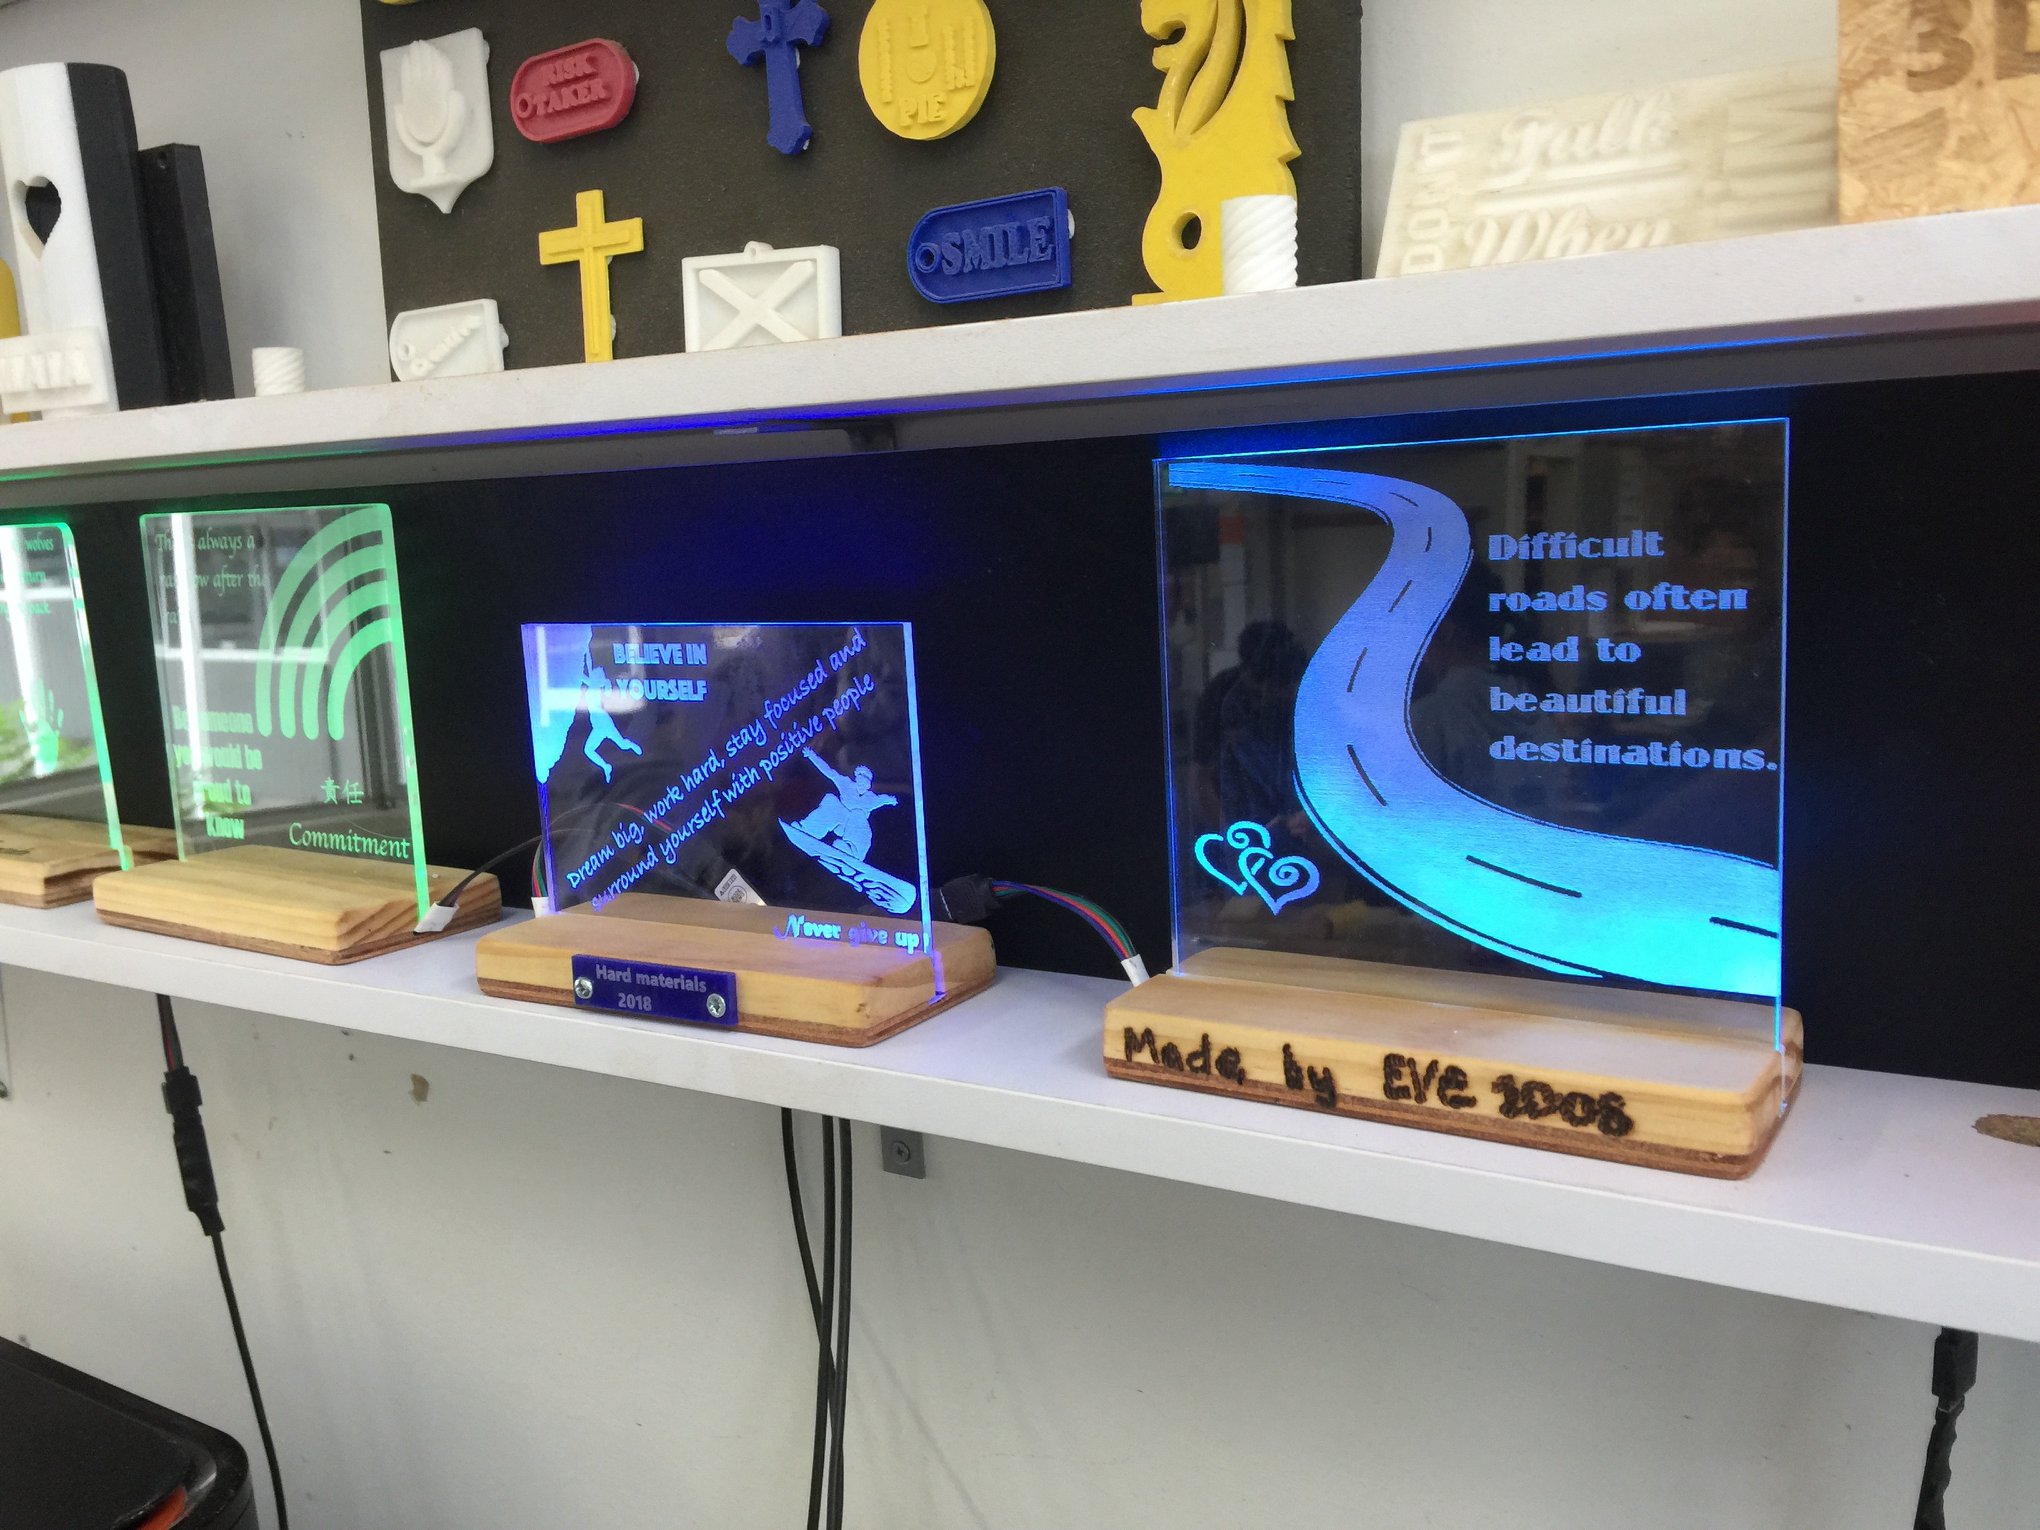 Students designing the future with lasers and CNC routers